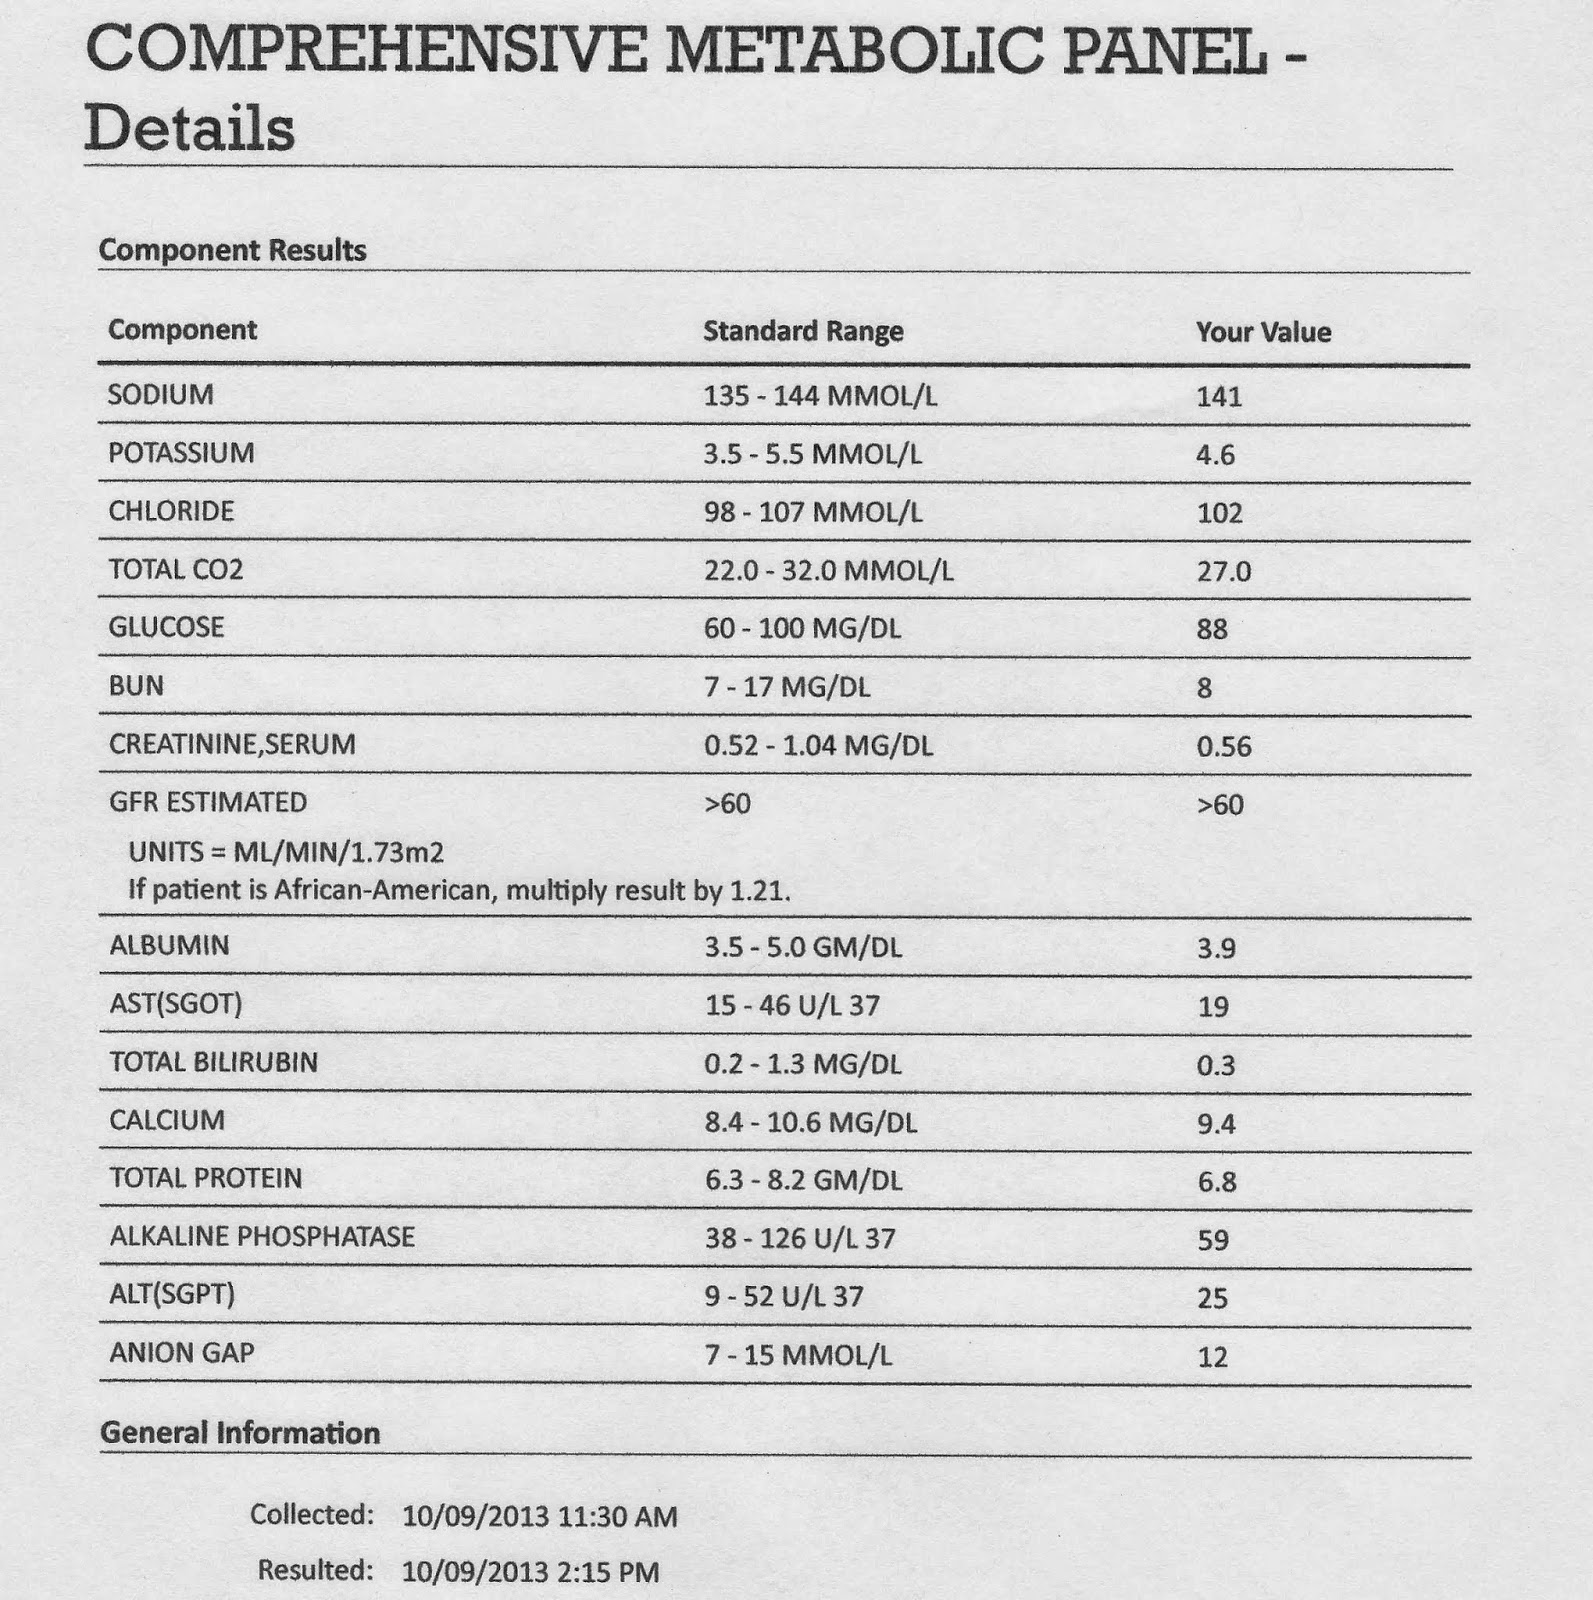 What is the basic metabolic panel?